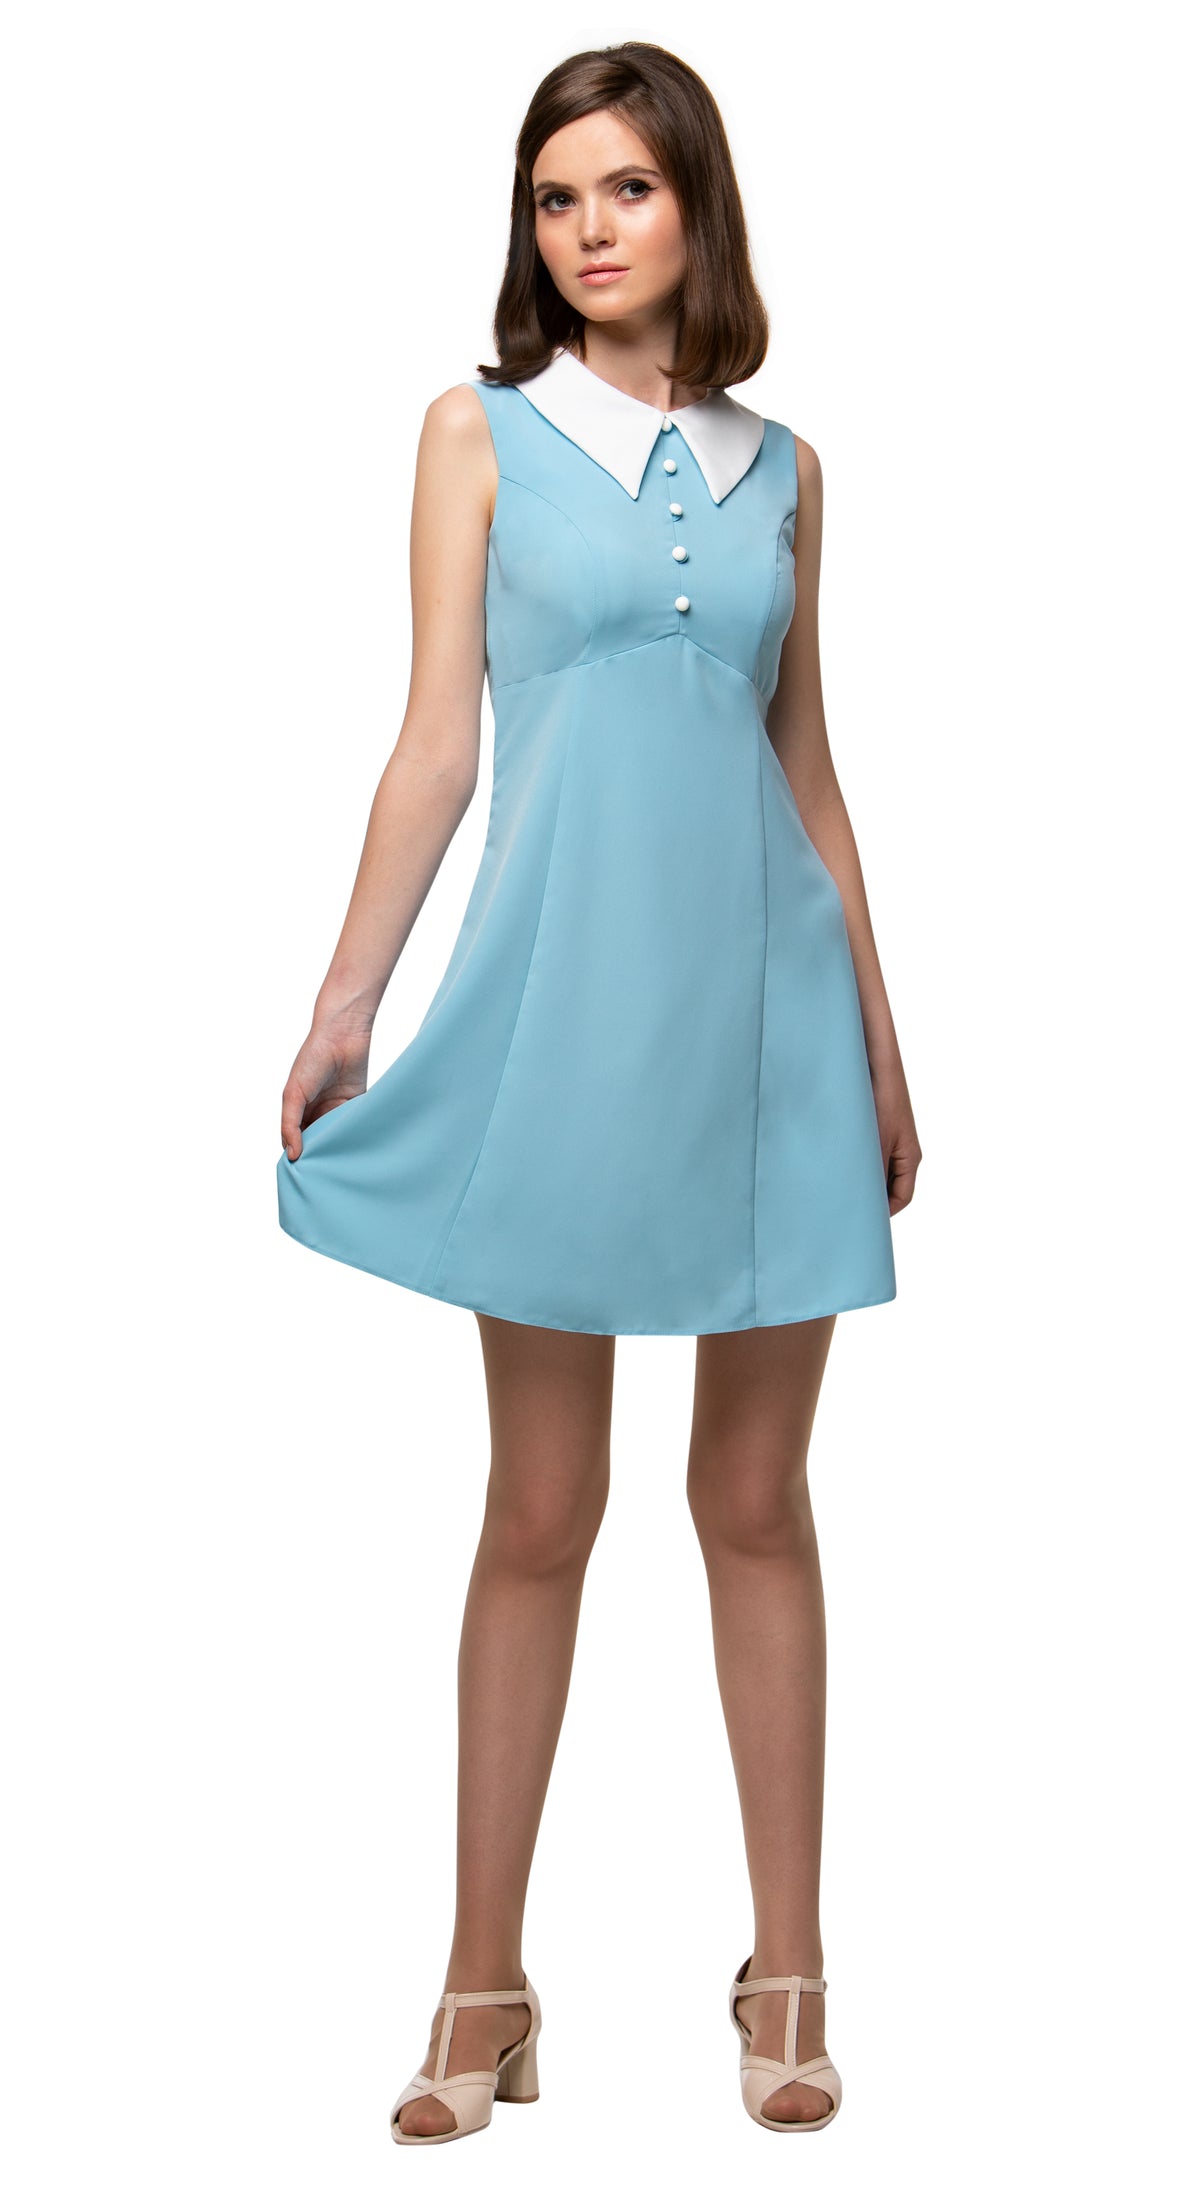 1960s Style Dress with Collar in Blue